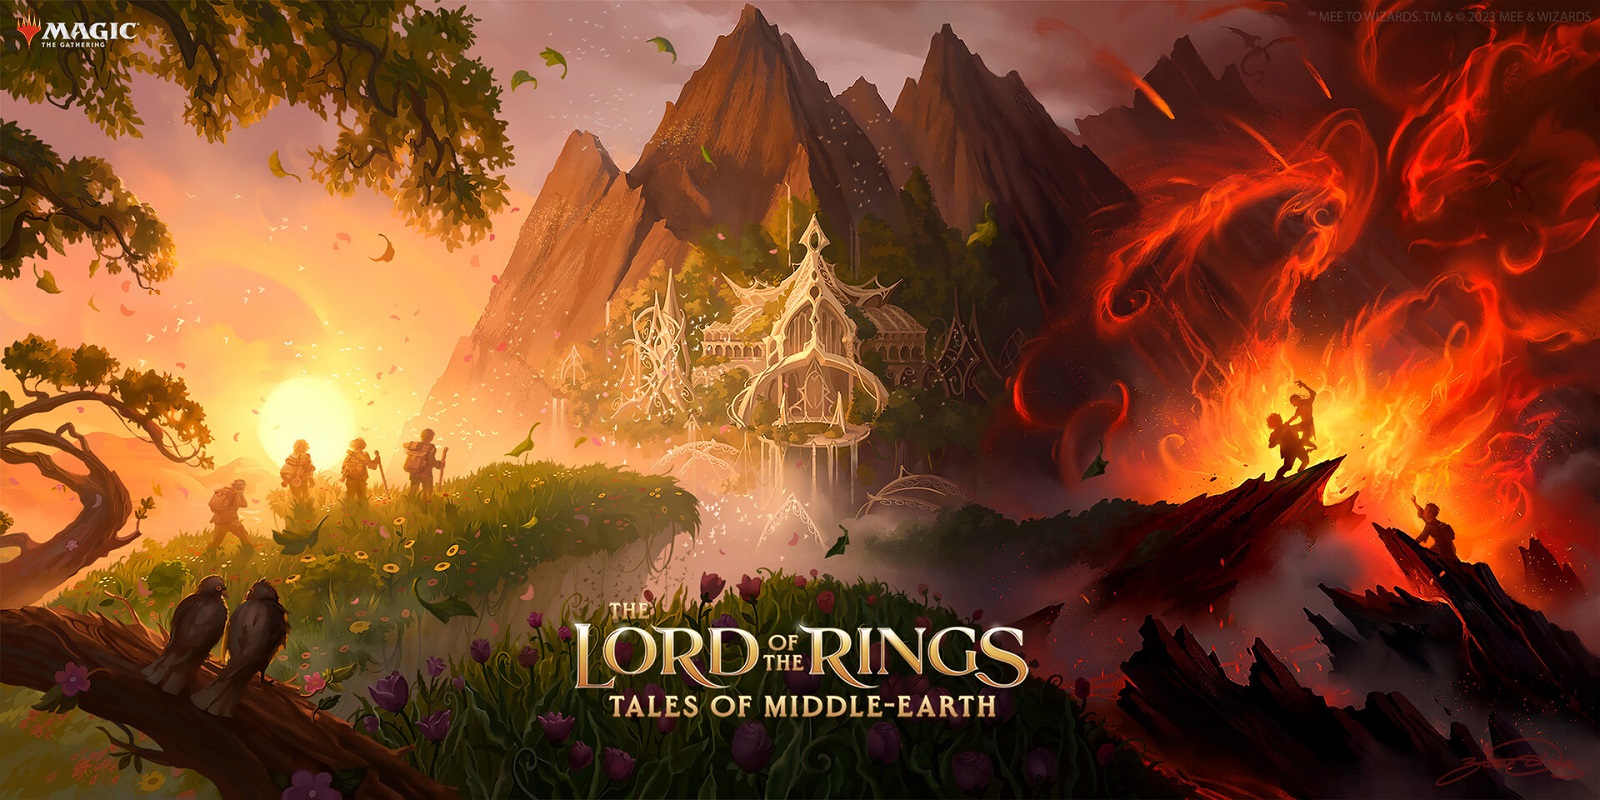 The Lord of the Rings: Tales of Middle-earth is the perfect MTG intro